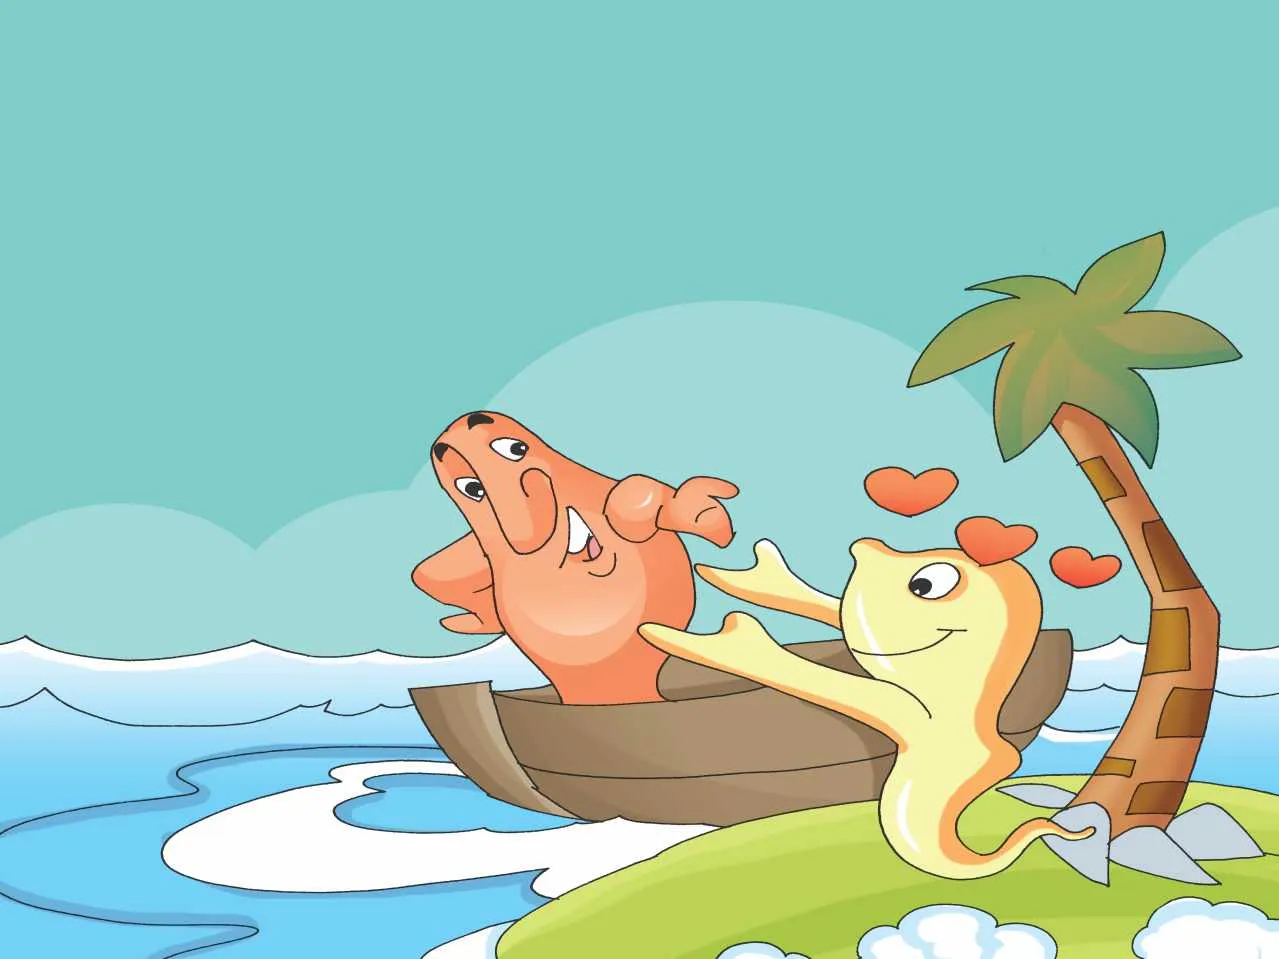 two creatures on an island cartoon image